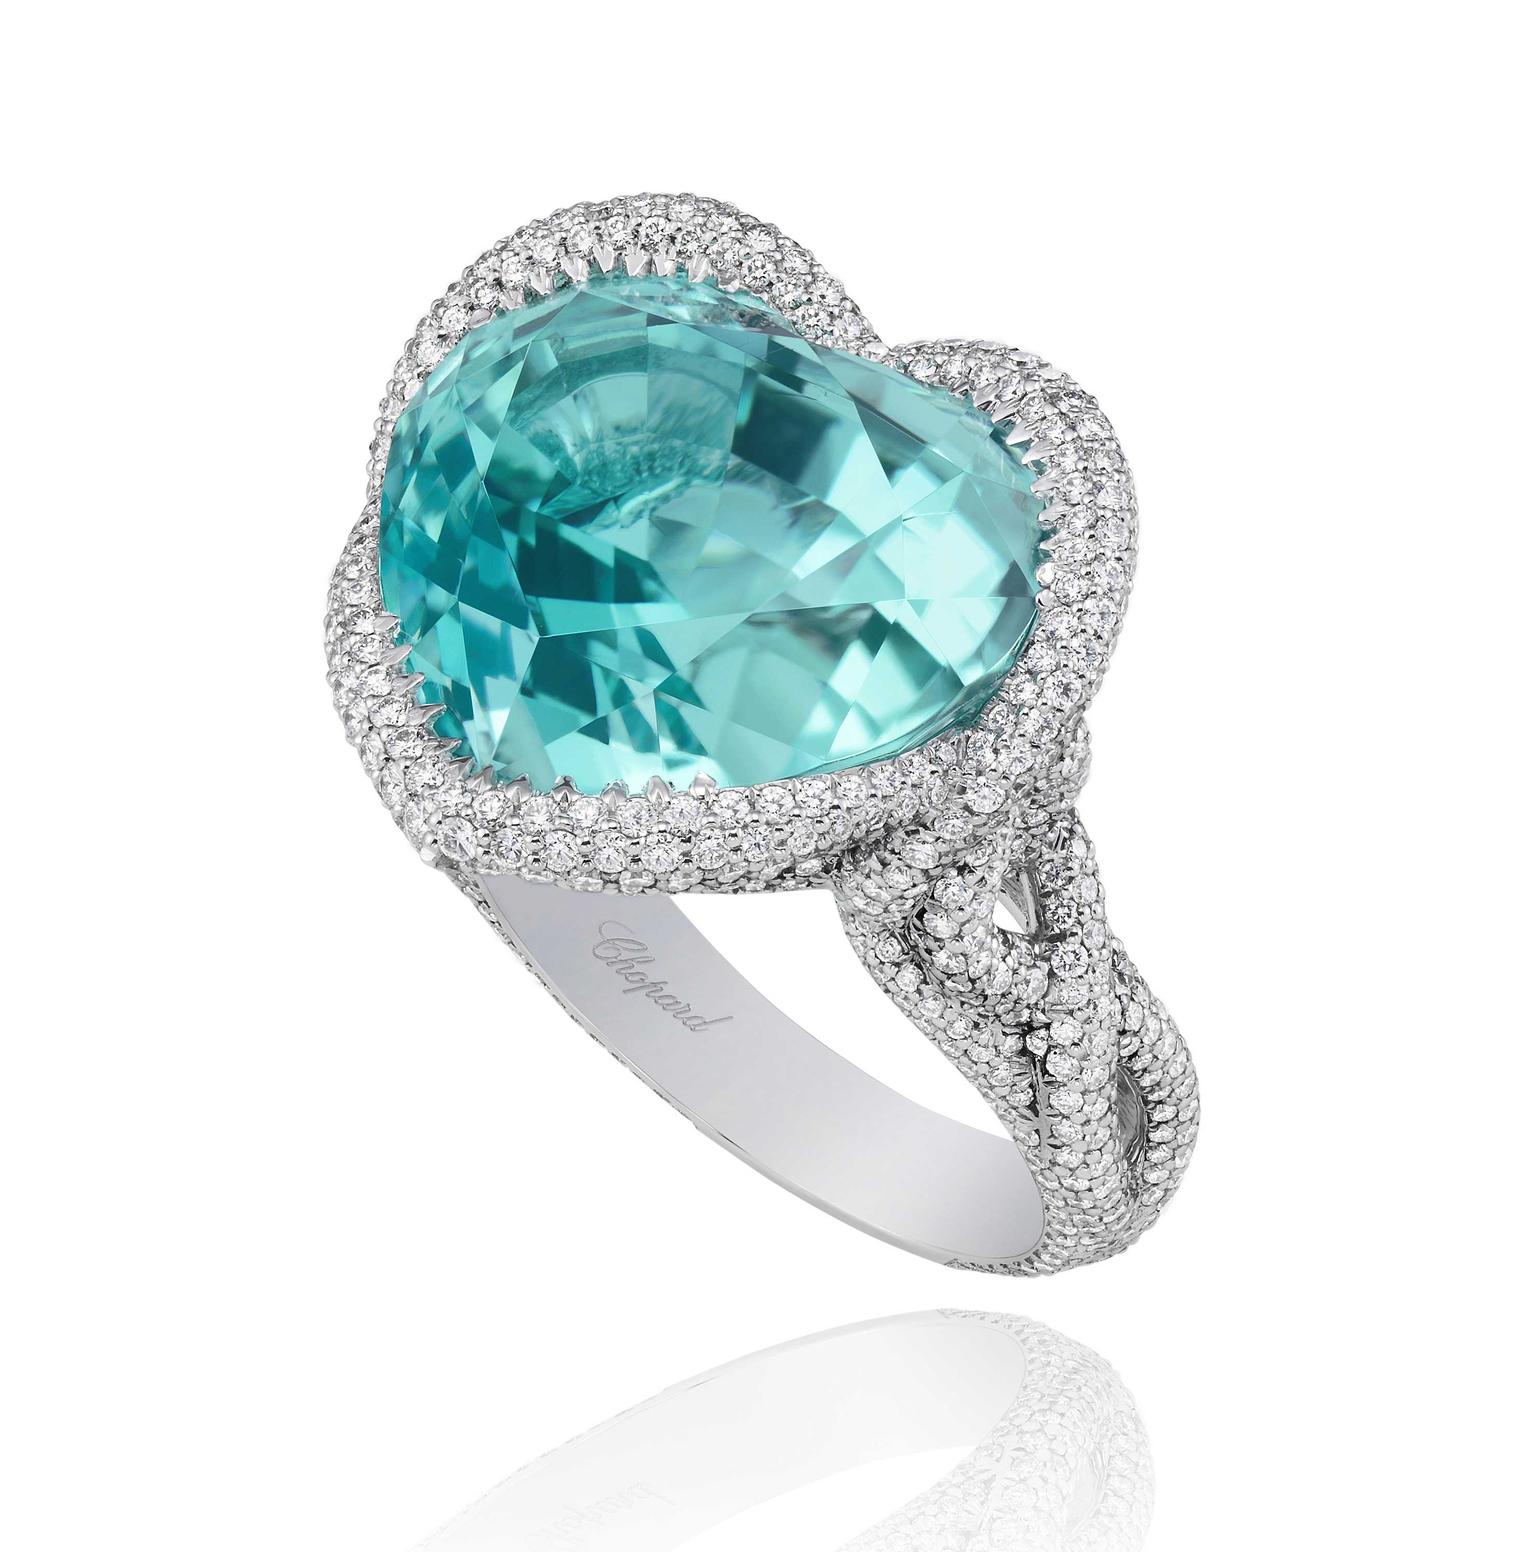 A bright, attention-seeking heart-shaped Paraiba tourmaline is the centrepiece of this ring from Chopard's 2013 Red Carpet collection.